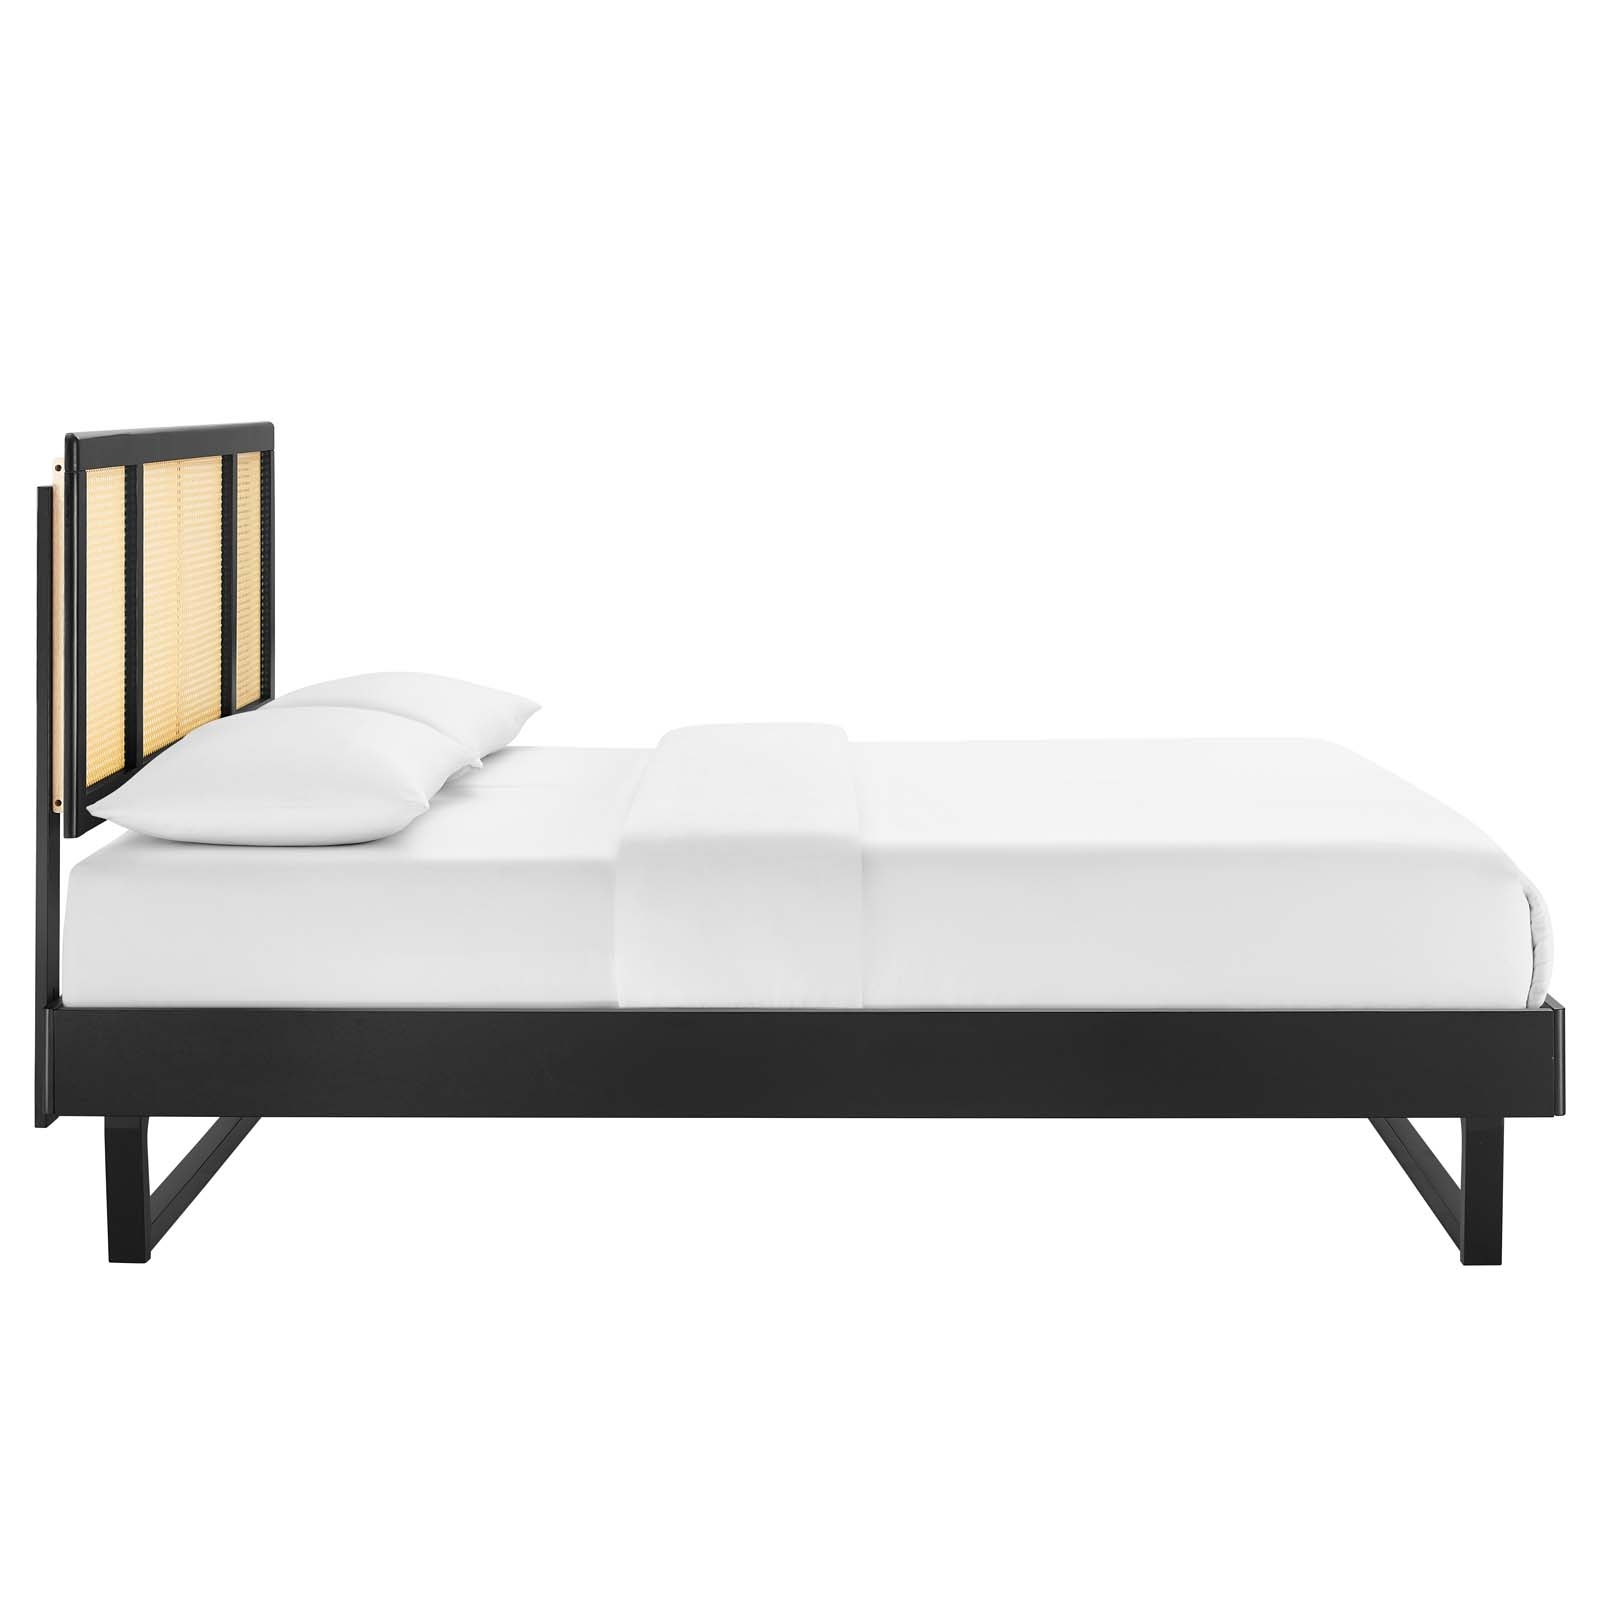 Kelsea Cane And Wood Full Platform Bed With Angular Legs, Black